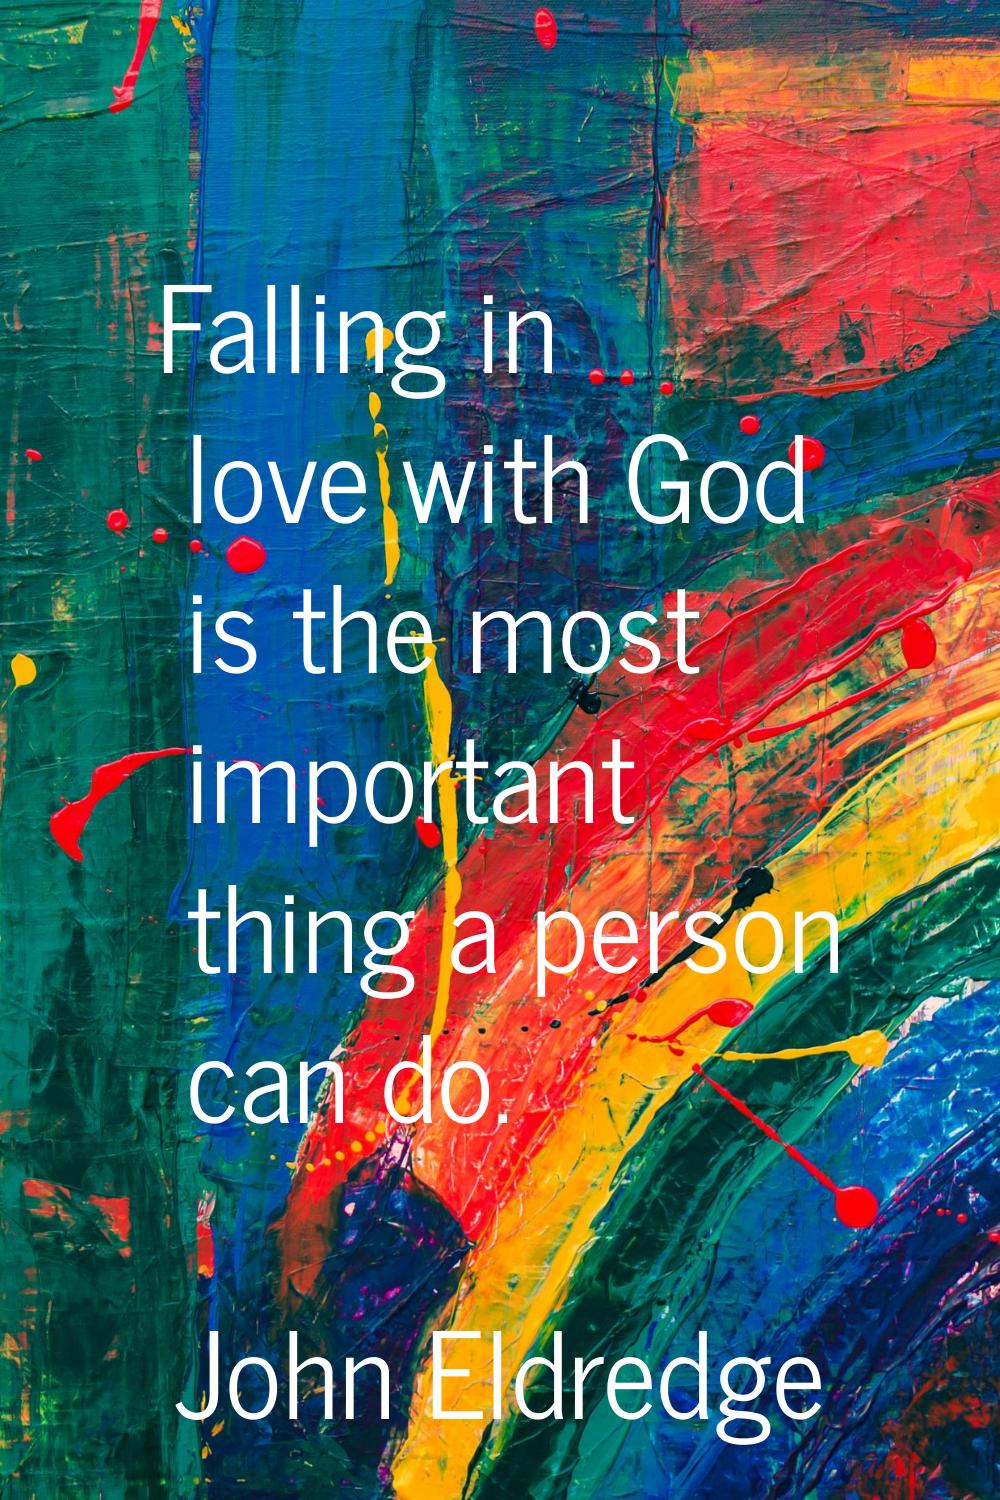 Falling in love with God is the most important thing a person can do.